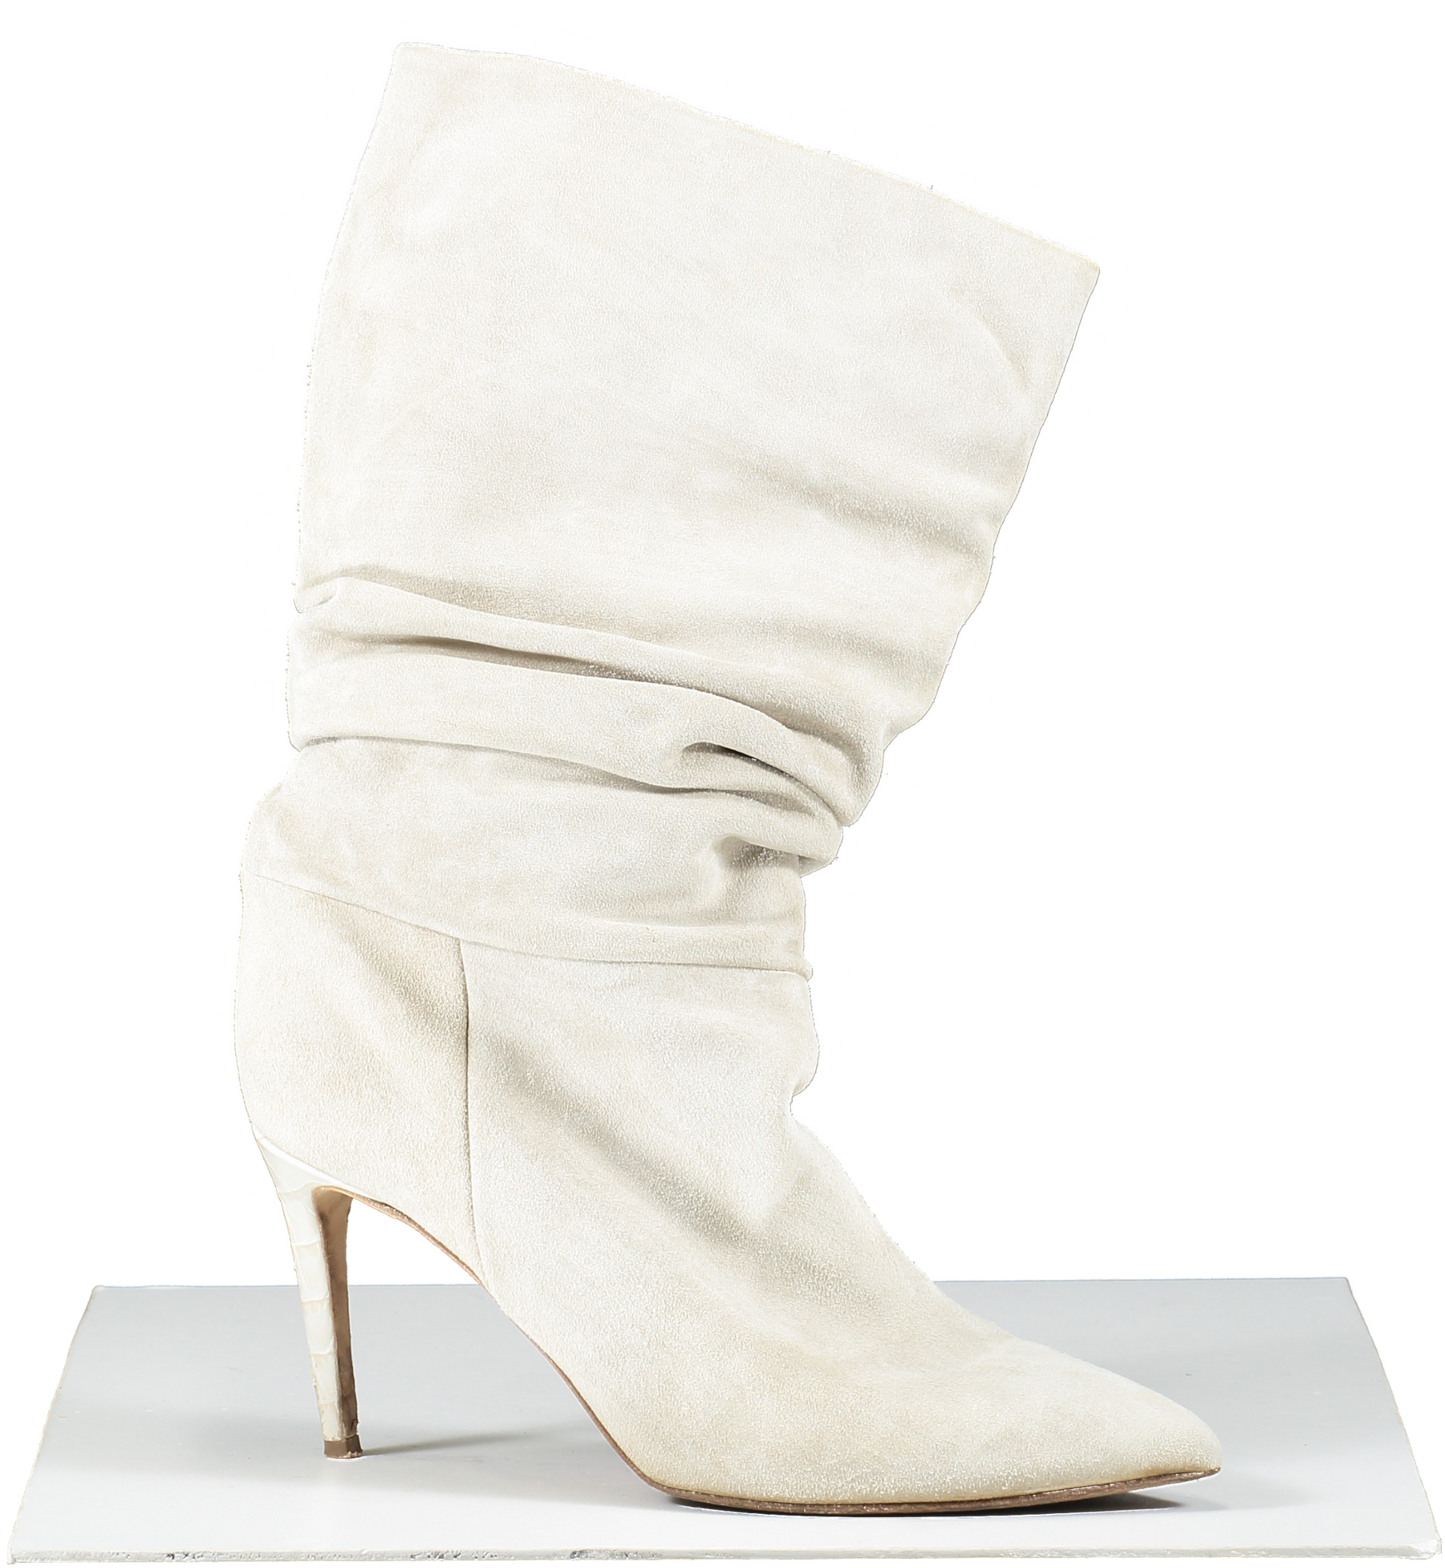 Paris Texas Beige Slouchy Suede Heeled Ankle Boots UK 7 EU 40 👠